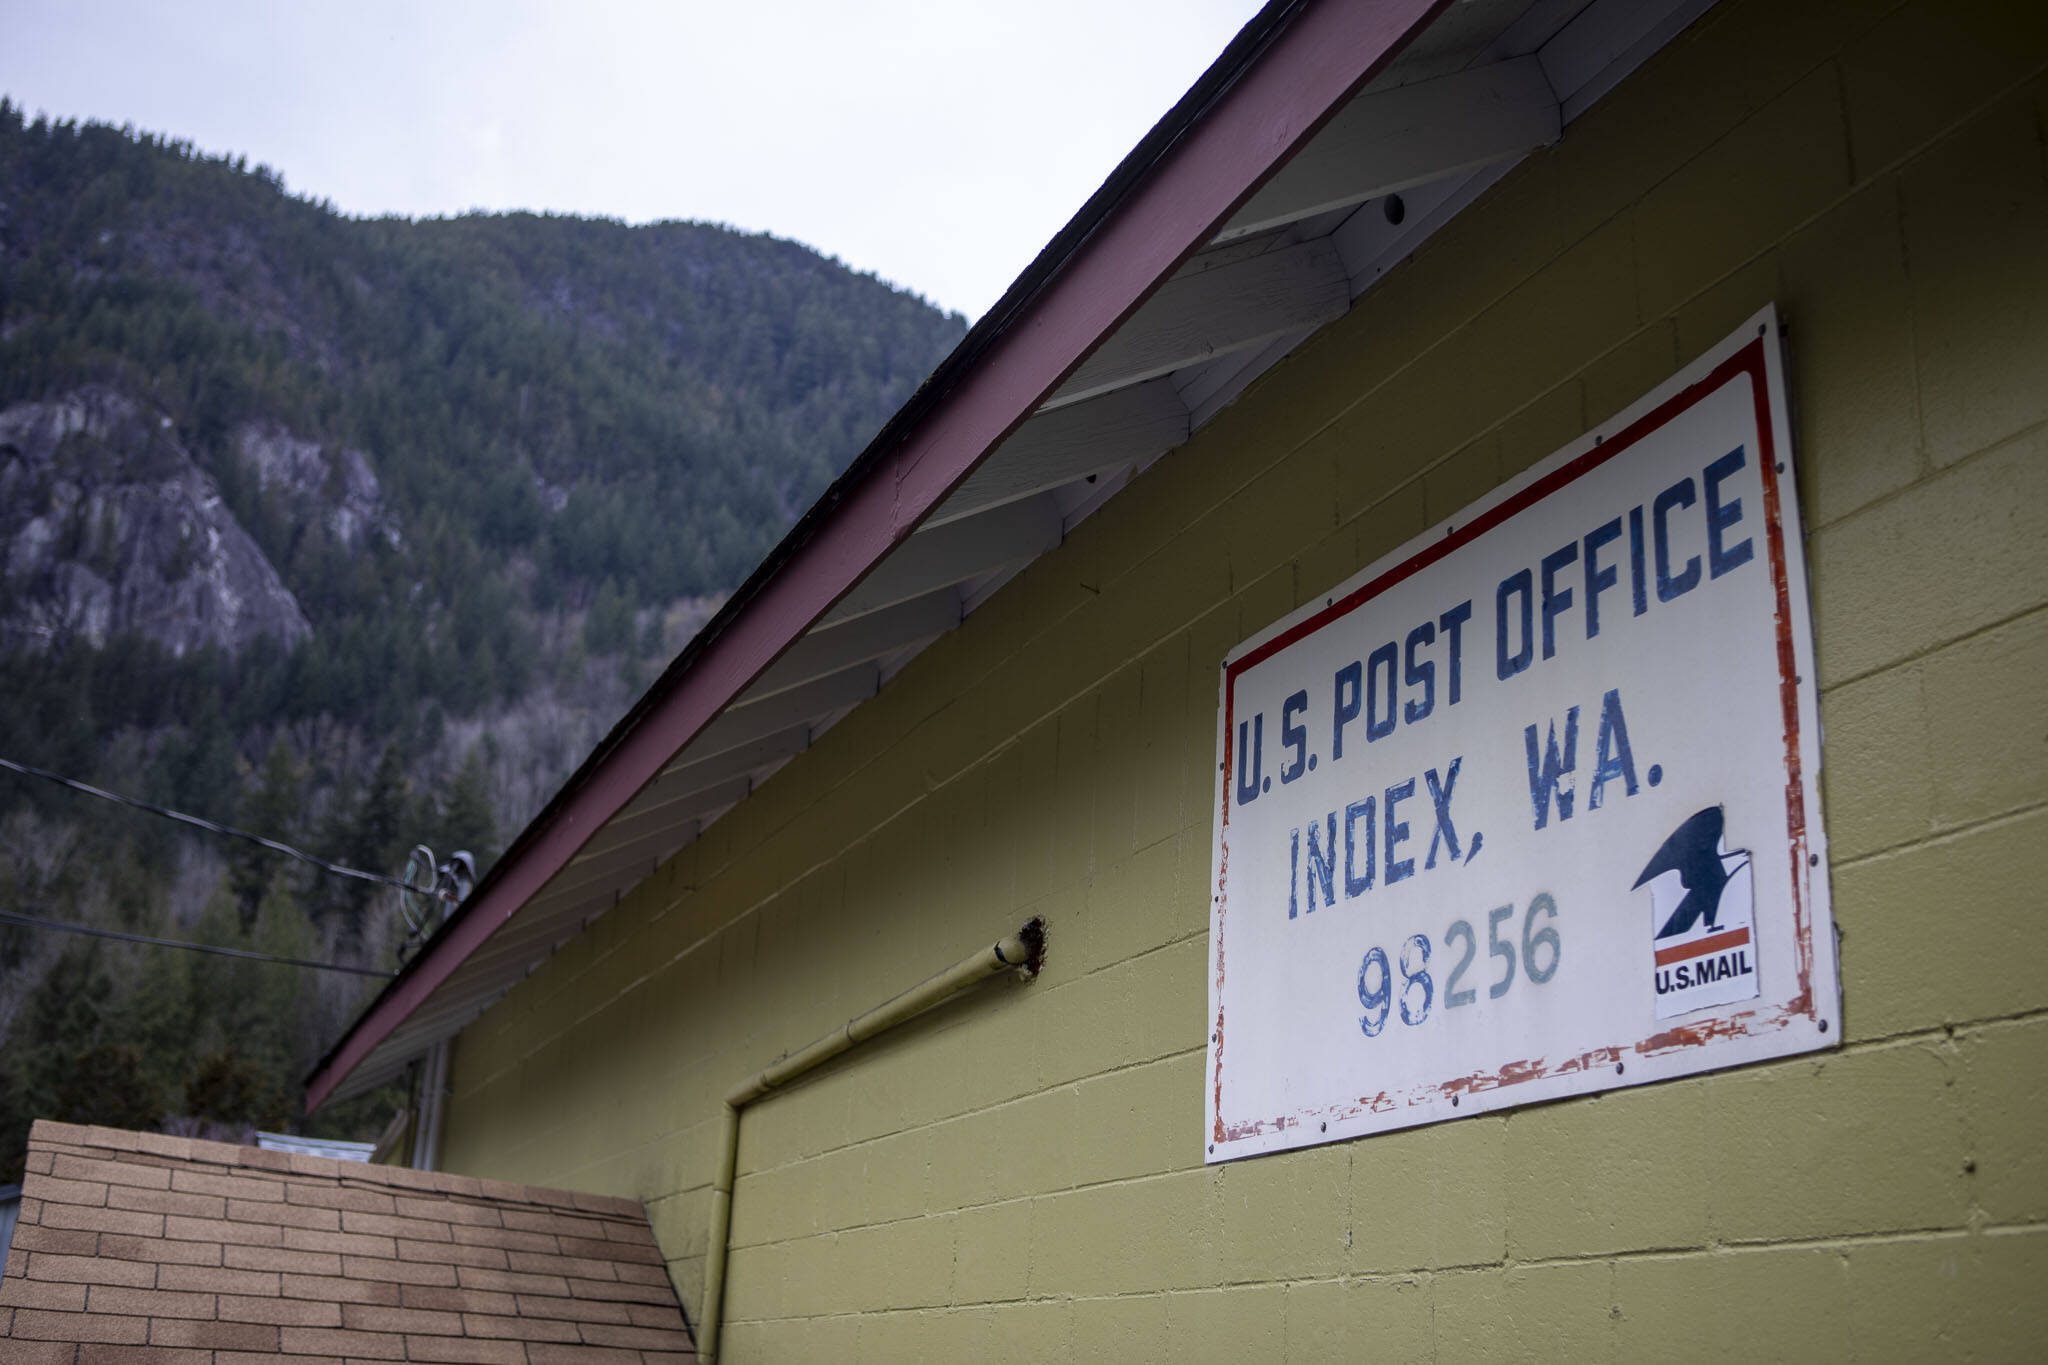 The town post office in Index, Washington on Wedesday, Nov. 29, 2023.  (Annie Barker / The Herald)